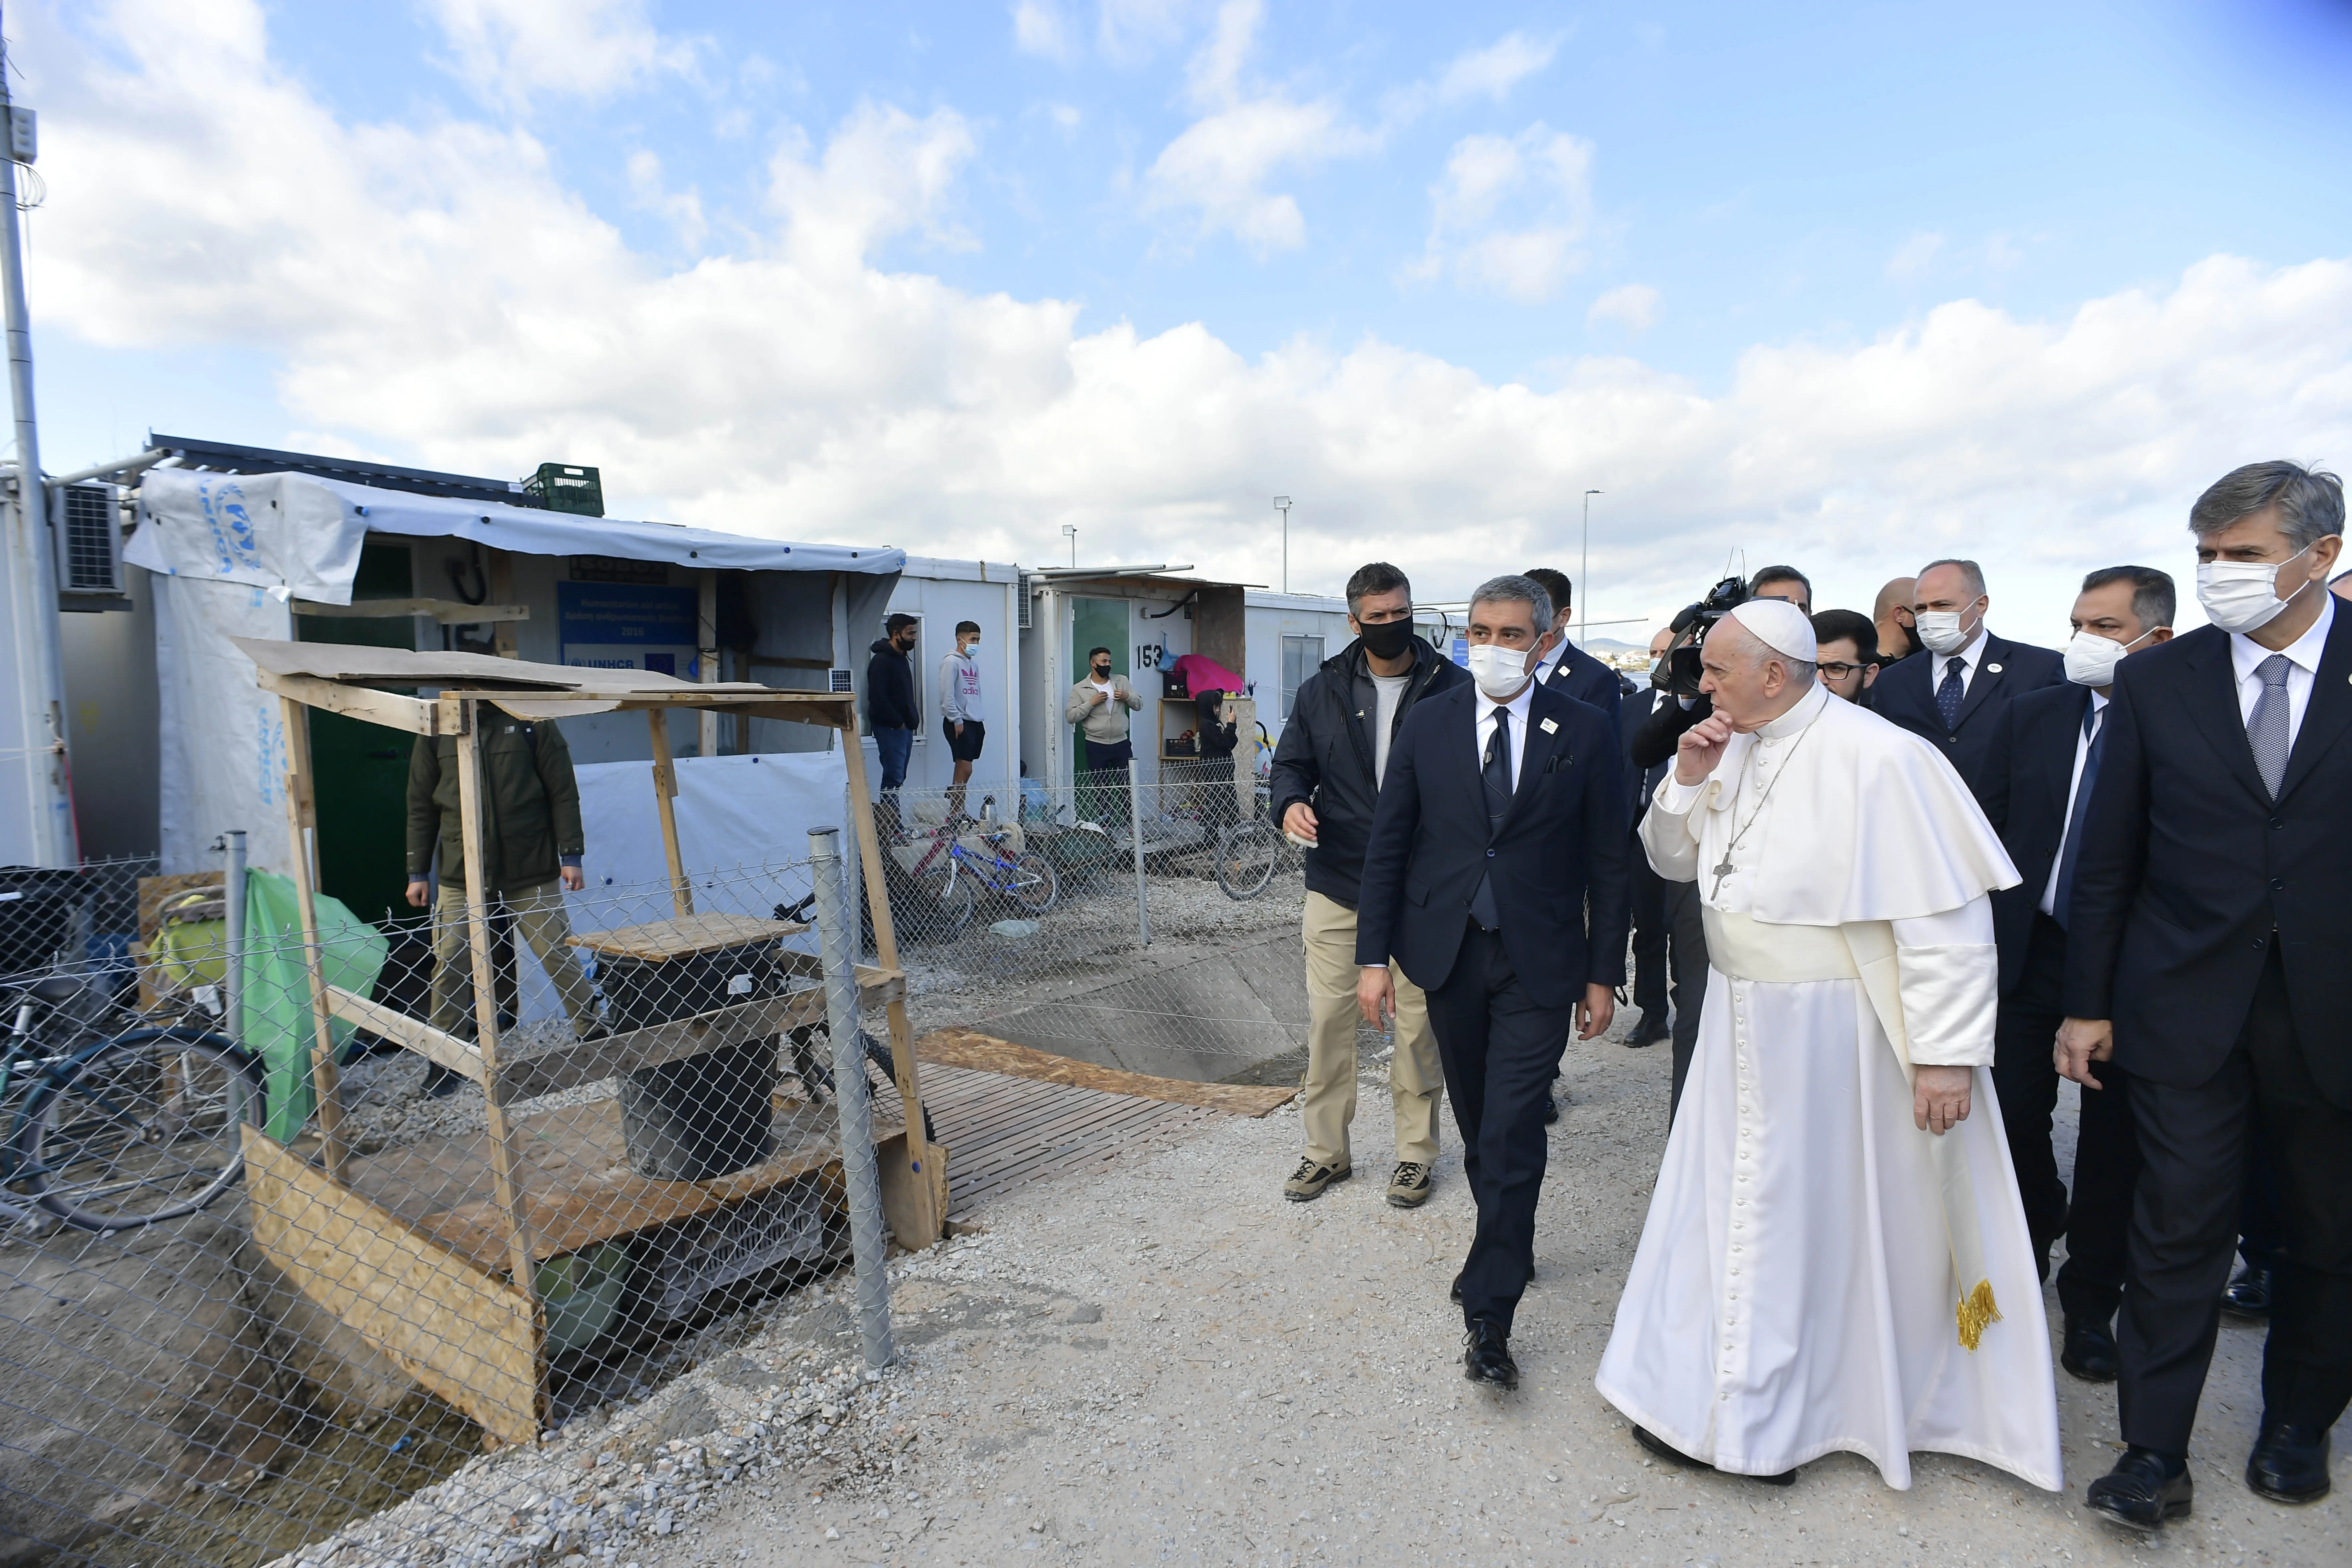 Pope Francis visits the Mavrovouni refugee camp on the Greek island of Lesbos on Dec. 5, 2021?w=200&h=150